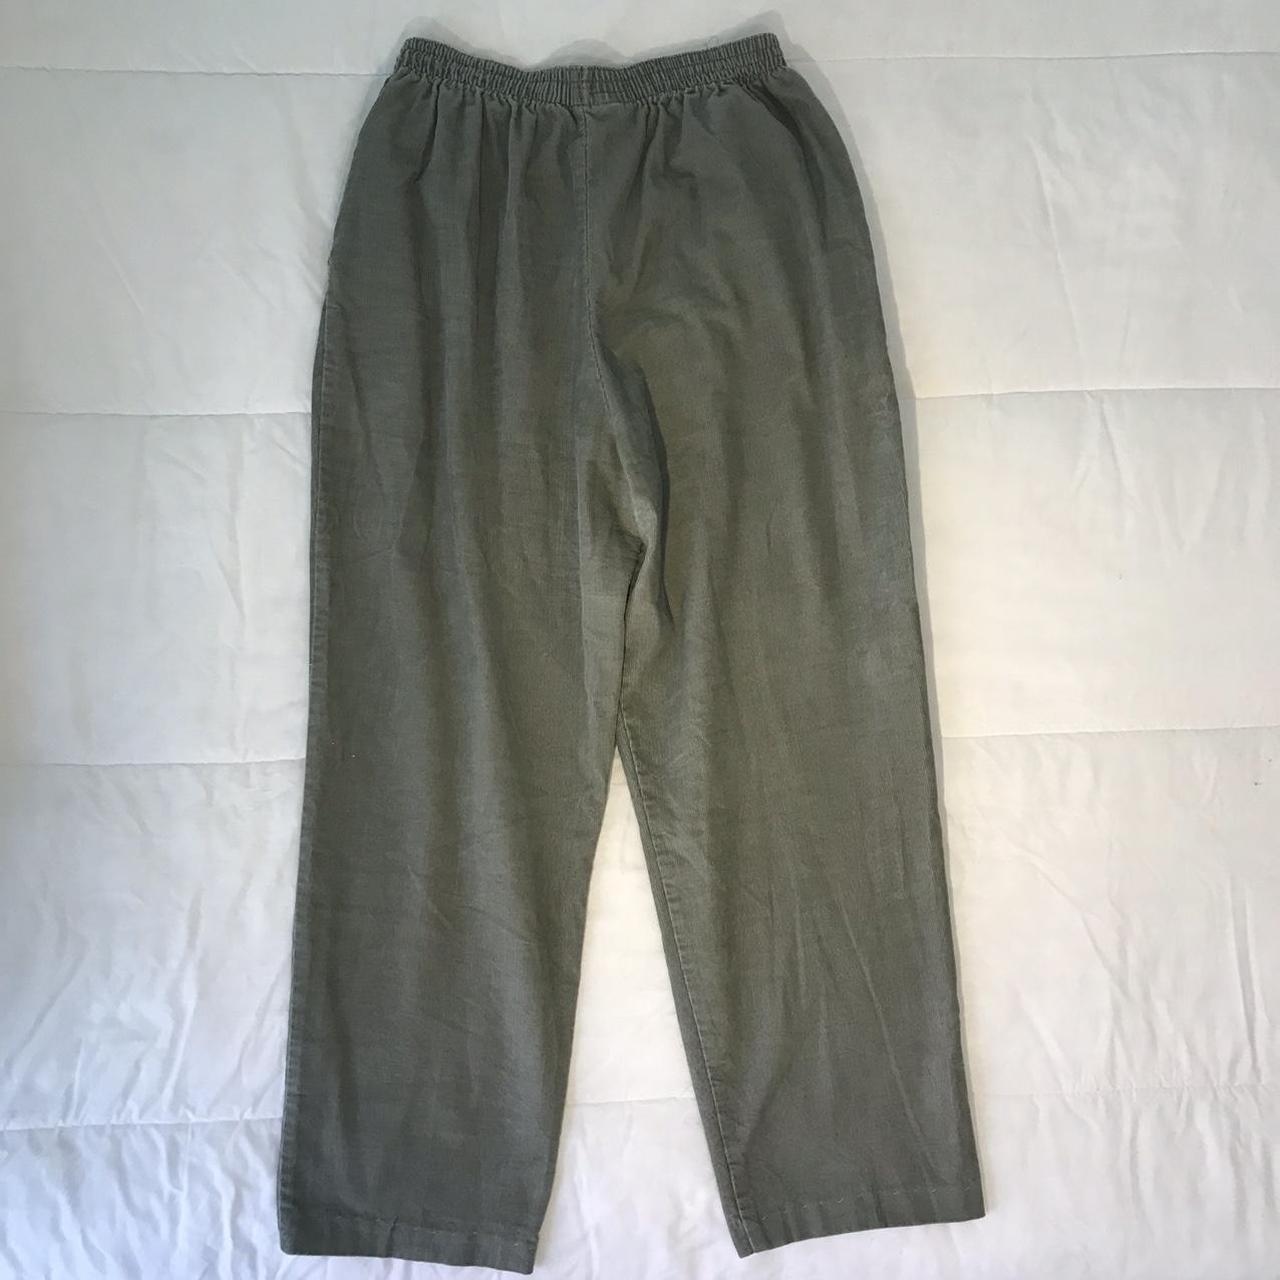 Vintage Sage green, 90’s corduroy trousers with... - Depop